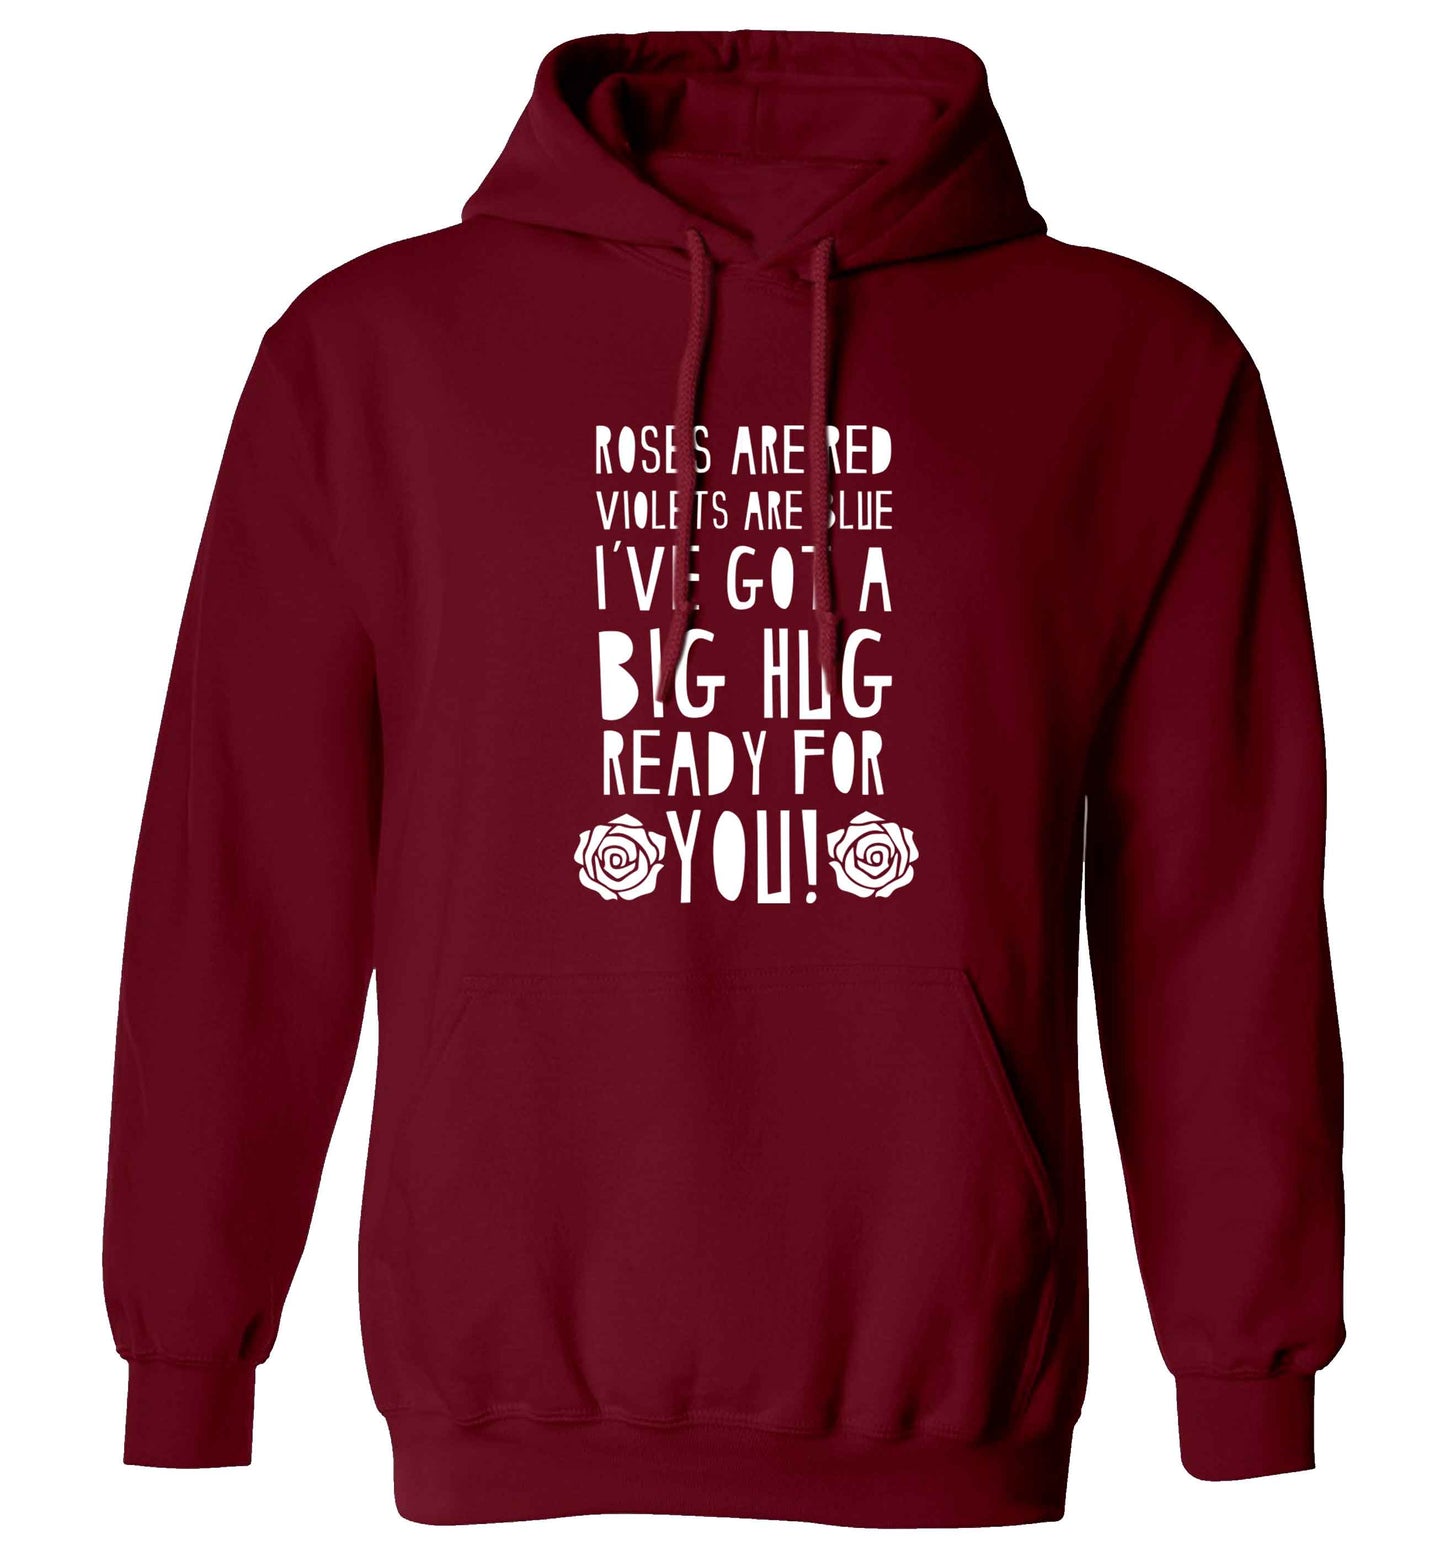 Roses are red violets are blue I've got a big hug coming for you adults unisex maroon hoodie 2XL